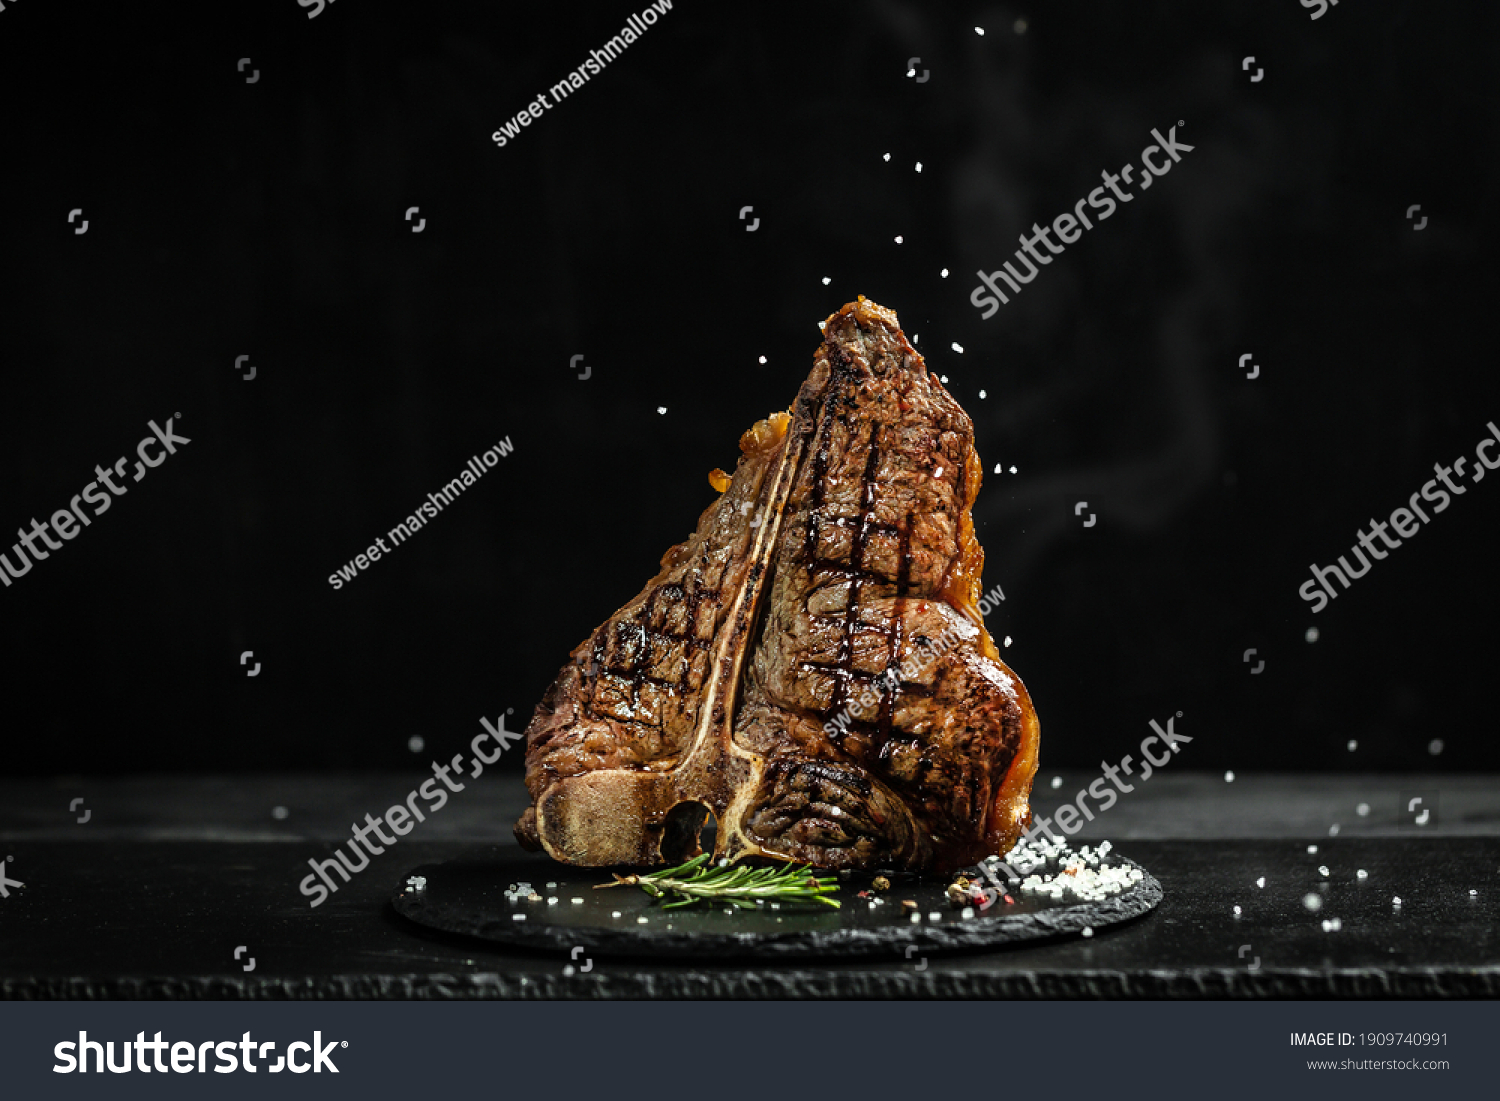 The T-bone or porterhouse steak of beef cut from the short loin. steaksT-shaped bone with meat on each side. banner, catering menu recipe place for text. #1909740991